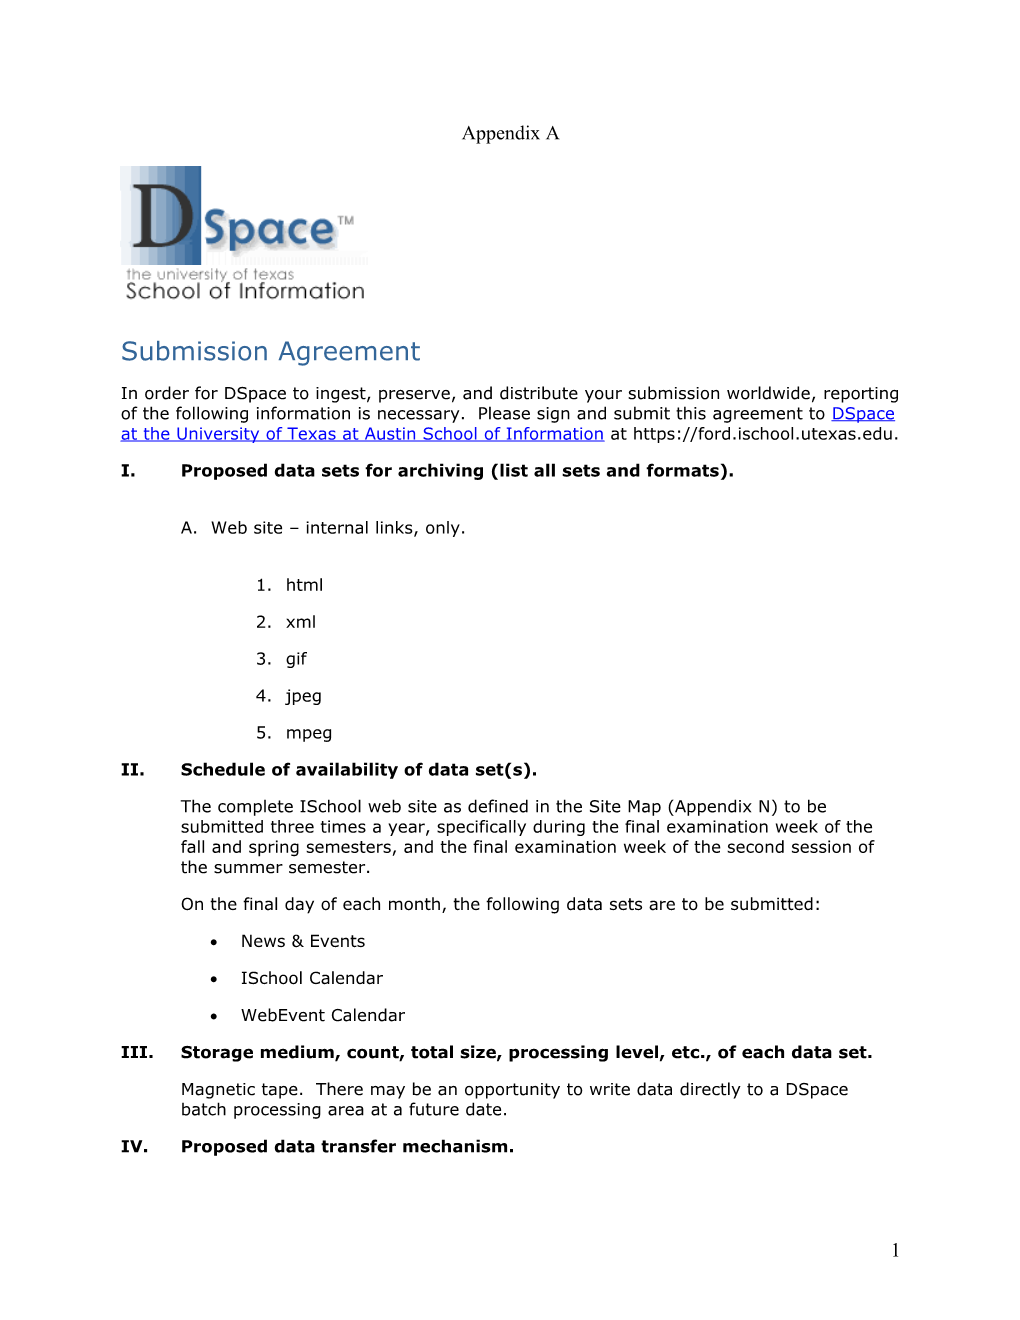 Submission Agreement